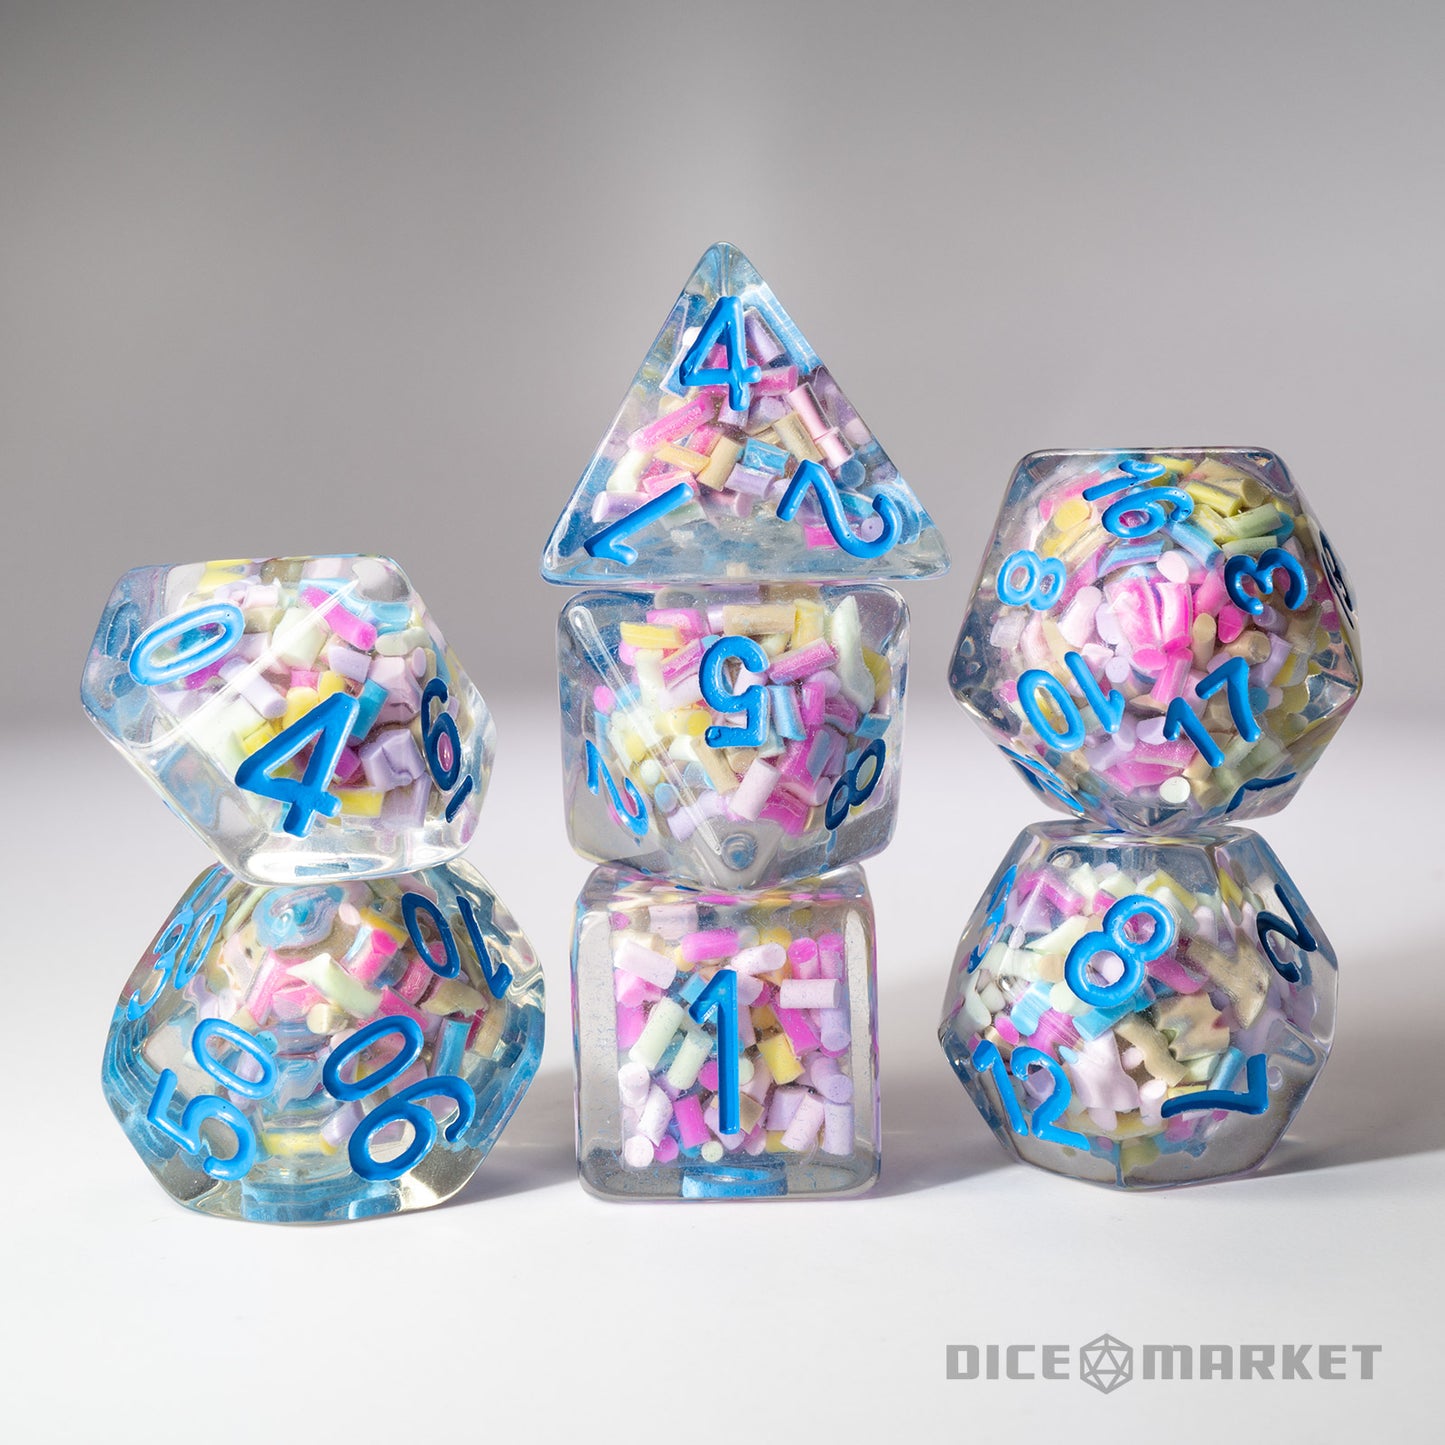 Candy Sprinkles Filled 7pc Polyhedral Dice Set with Blue Ink